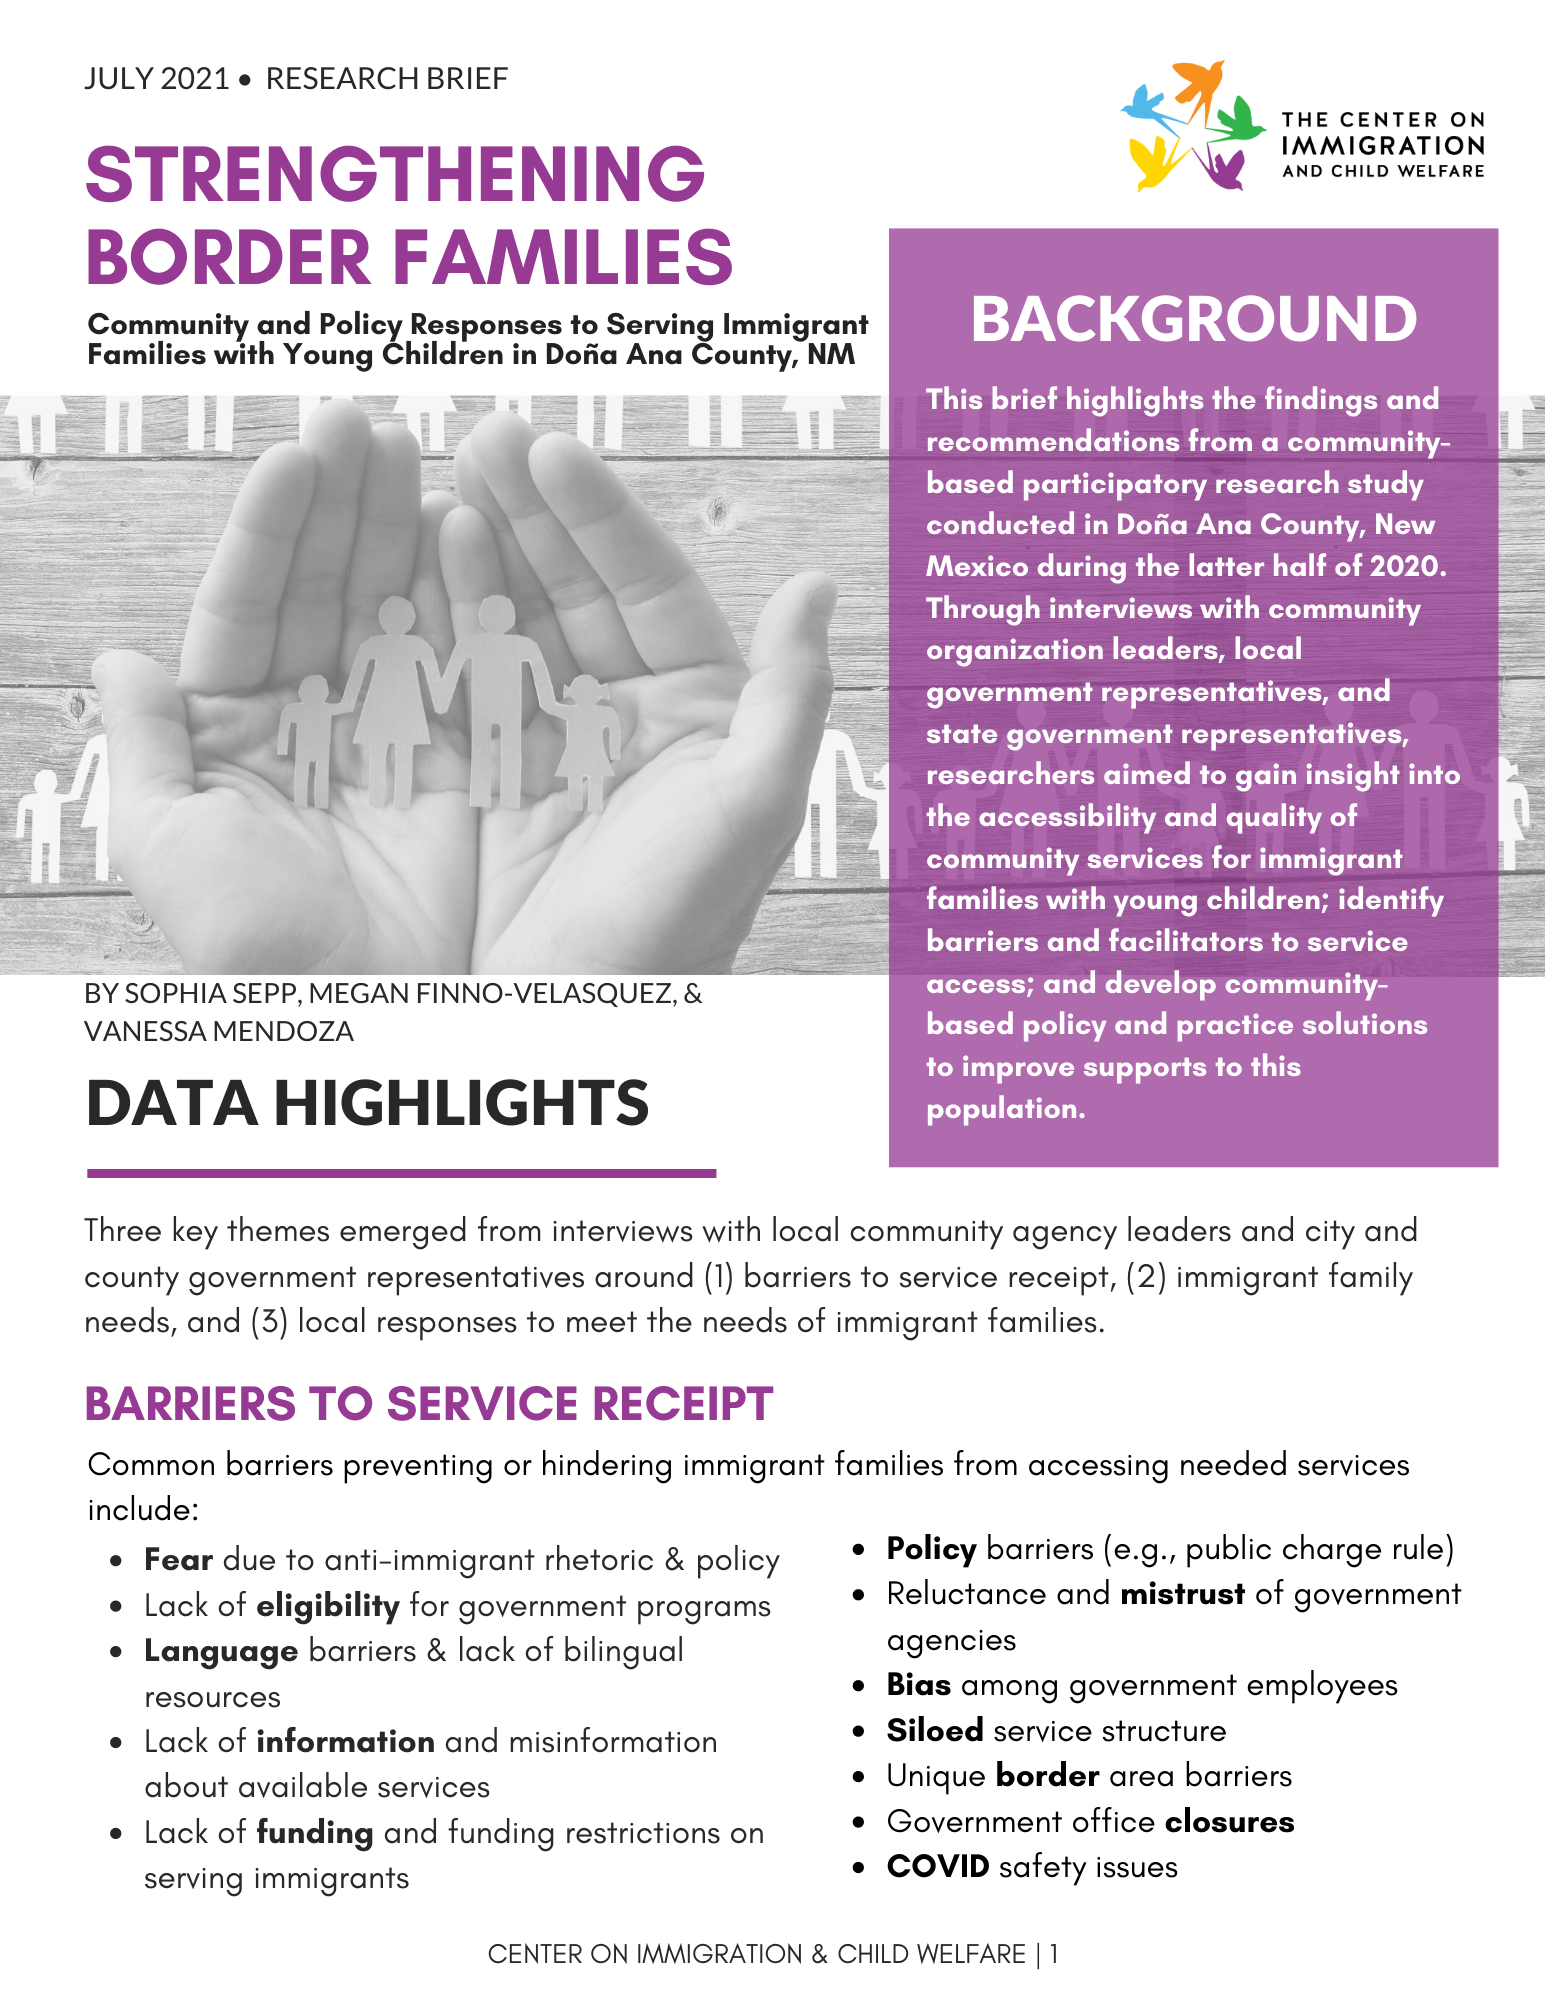 Research Brief - Strengthening Border Families